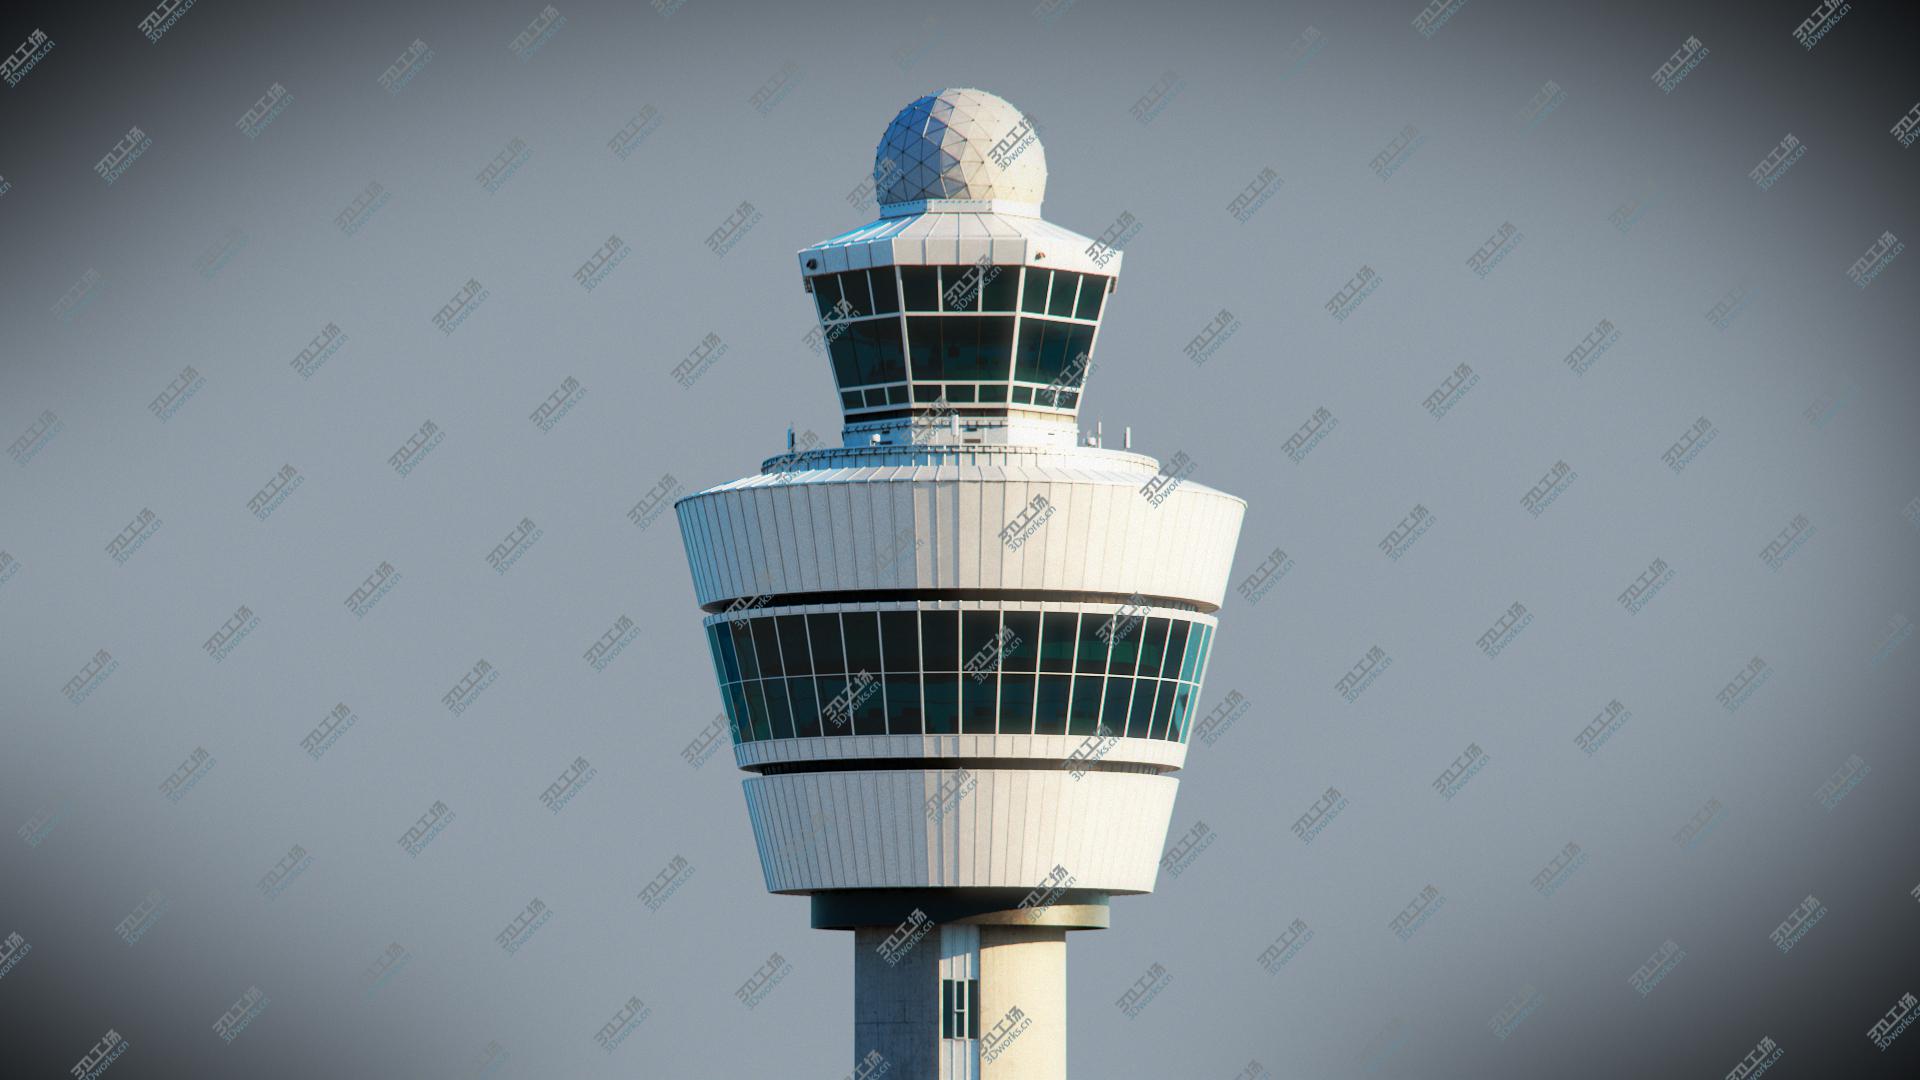 images/goods_img/2021040161/3D Airport Control Tower Amsterdam model/2.jpg